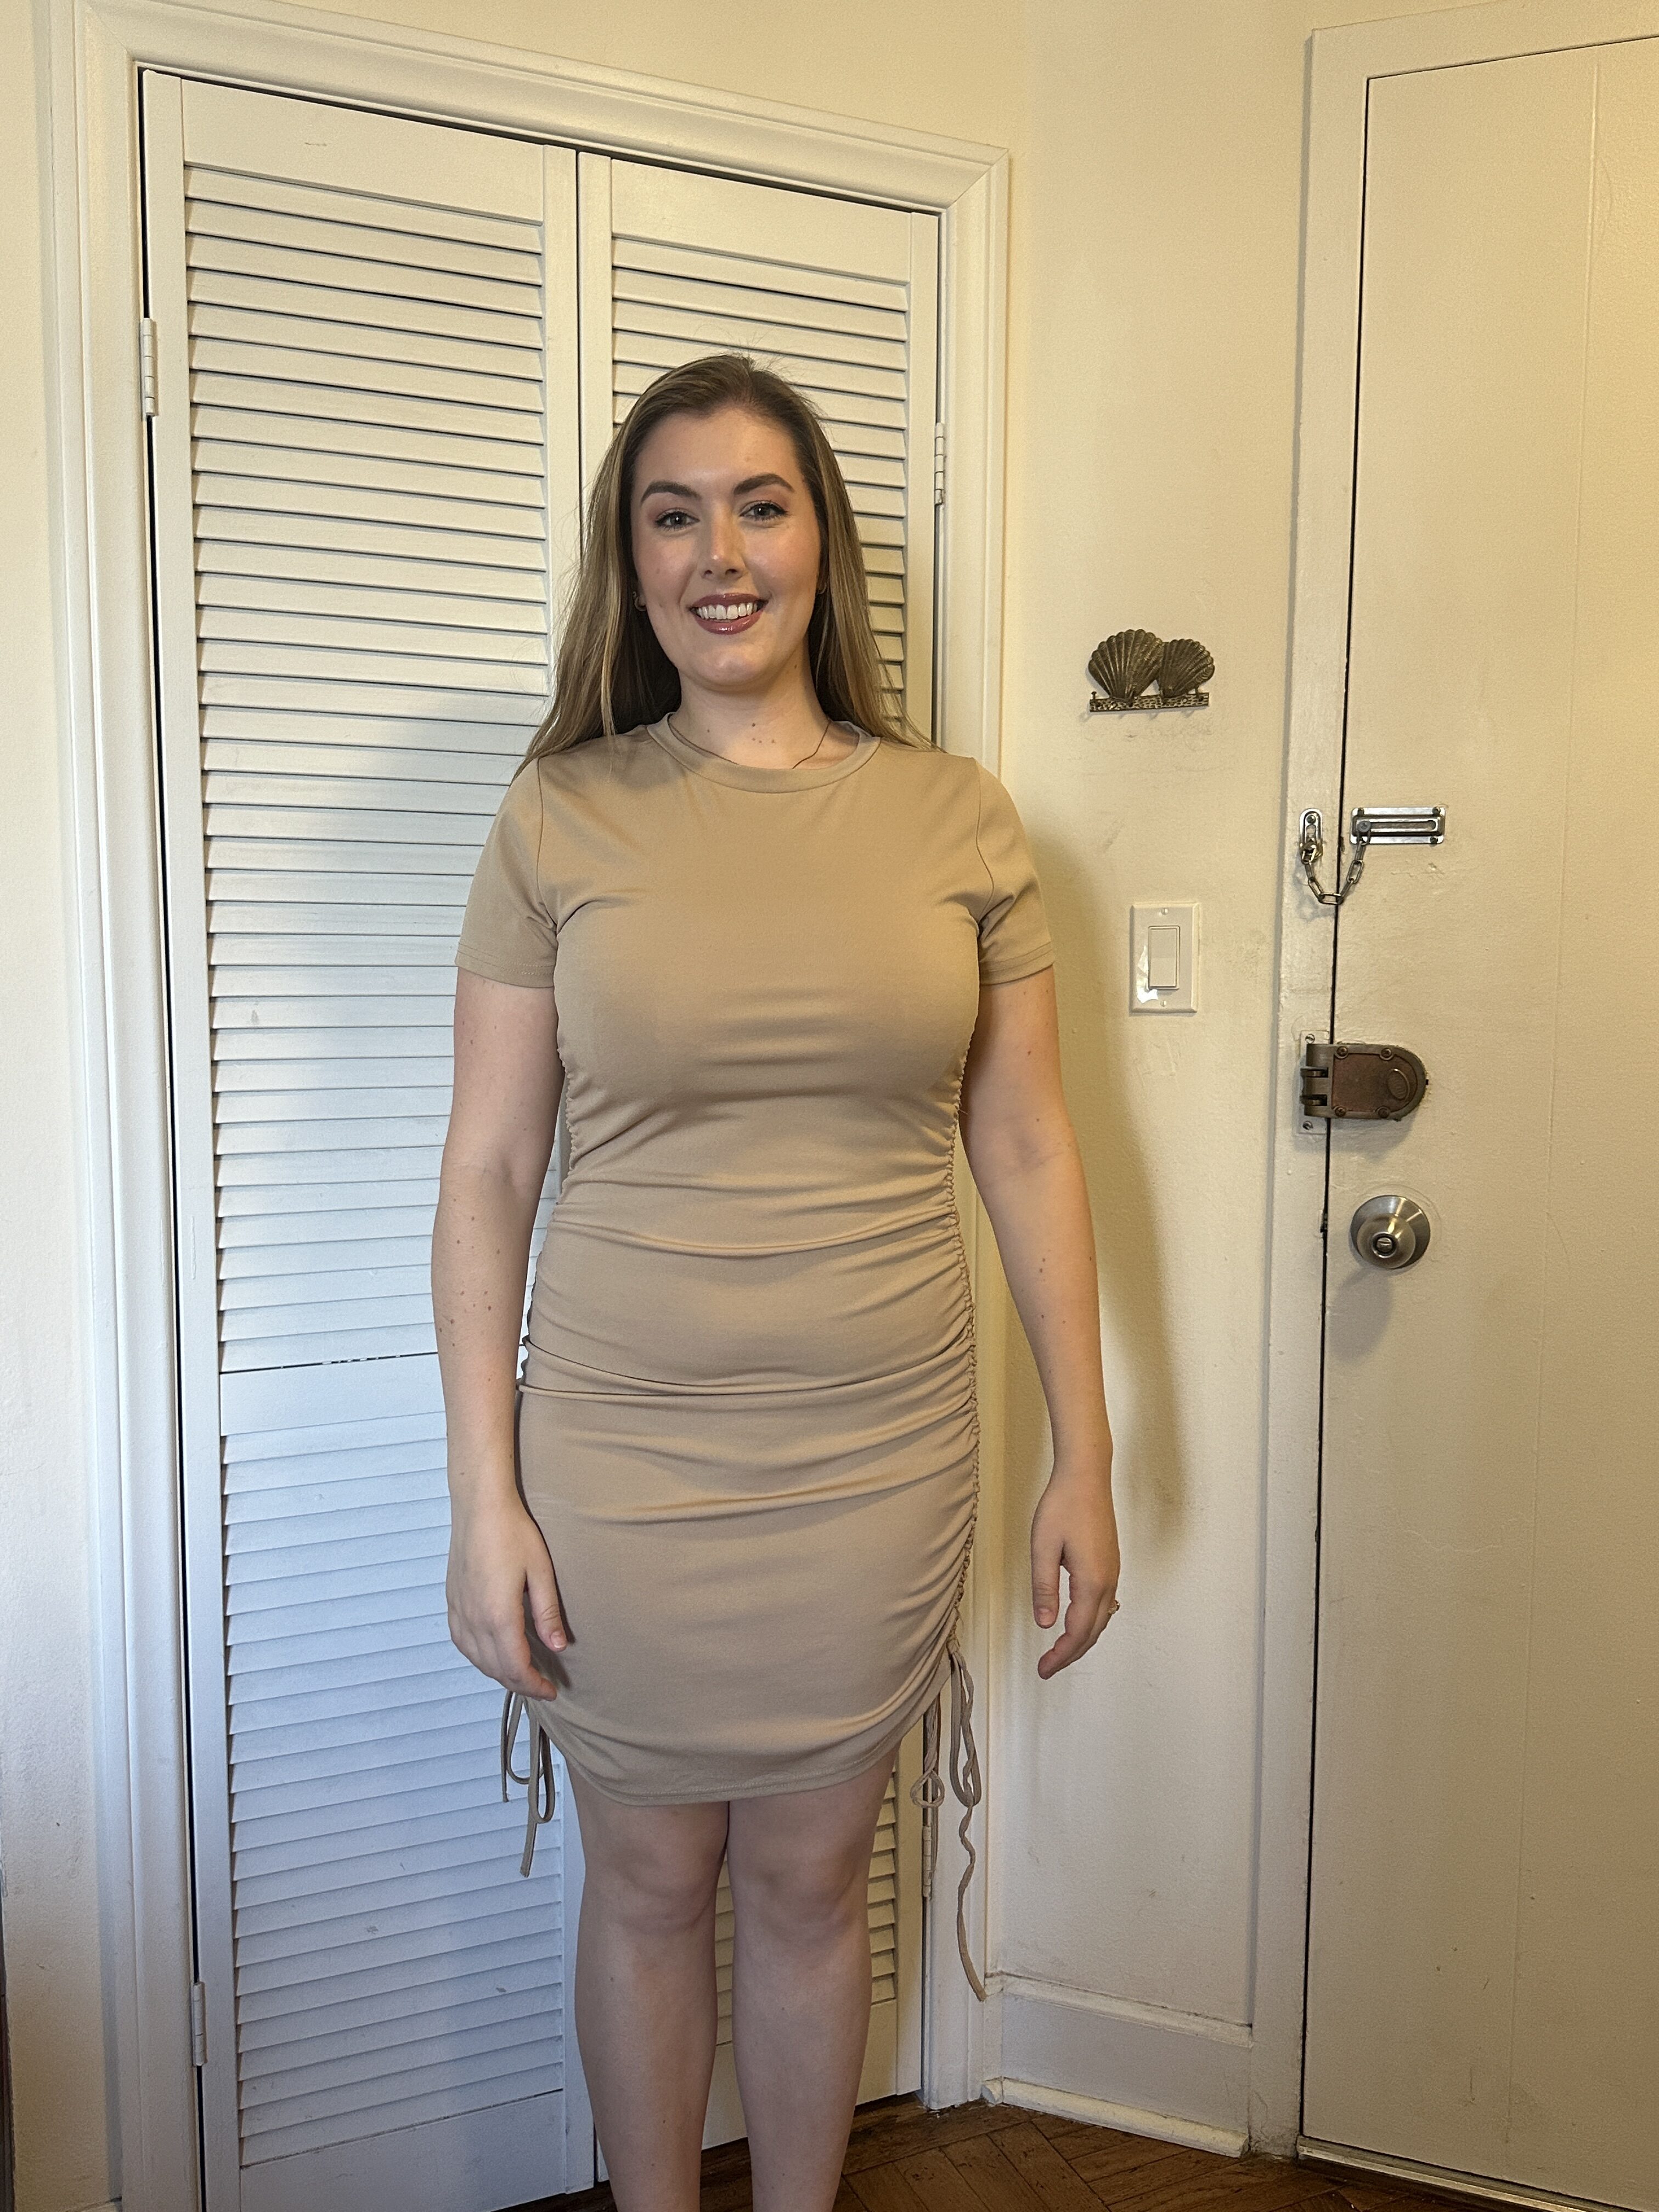 SPANX vs. SKIMS vs. Underoutfit – Which Shapewear Smooths Out My Curves?